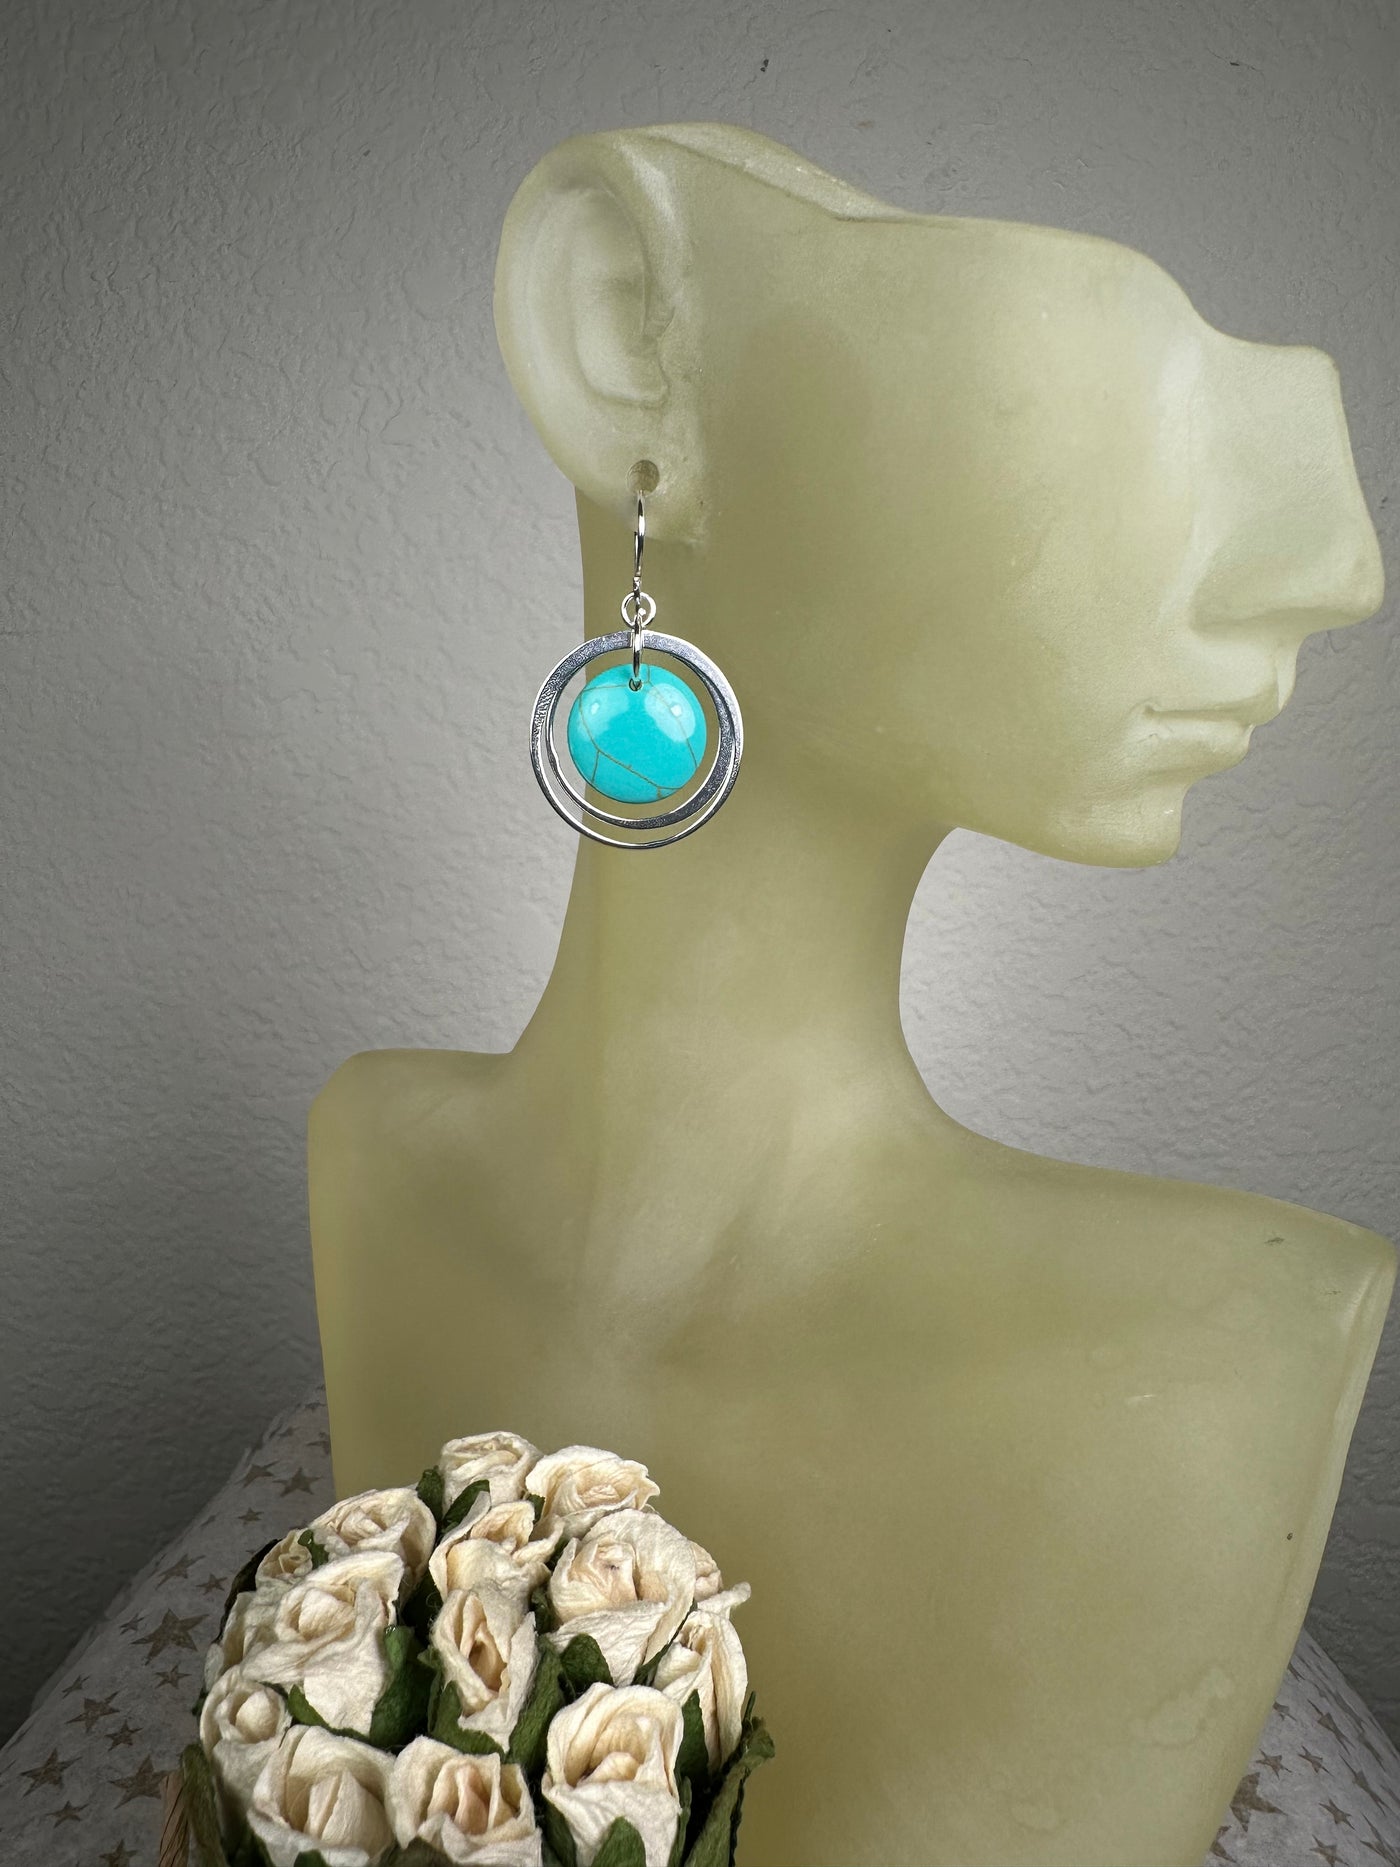 Round Disk Howlite-Turquoise Dangling Earrings in Sterling Silver